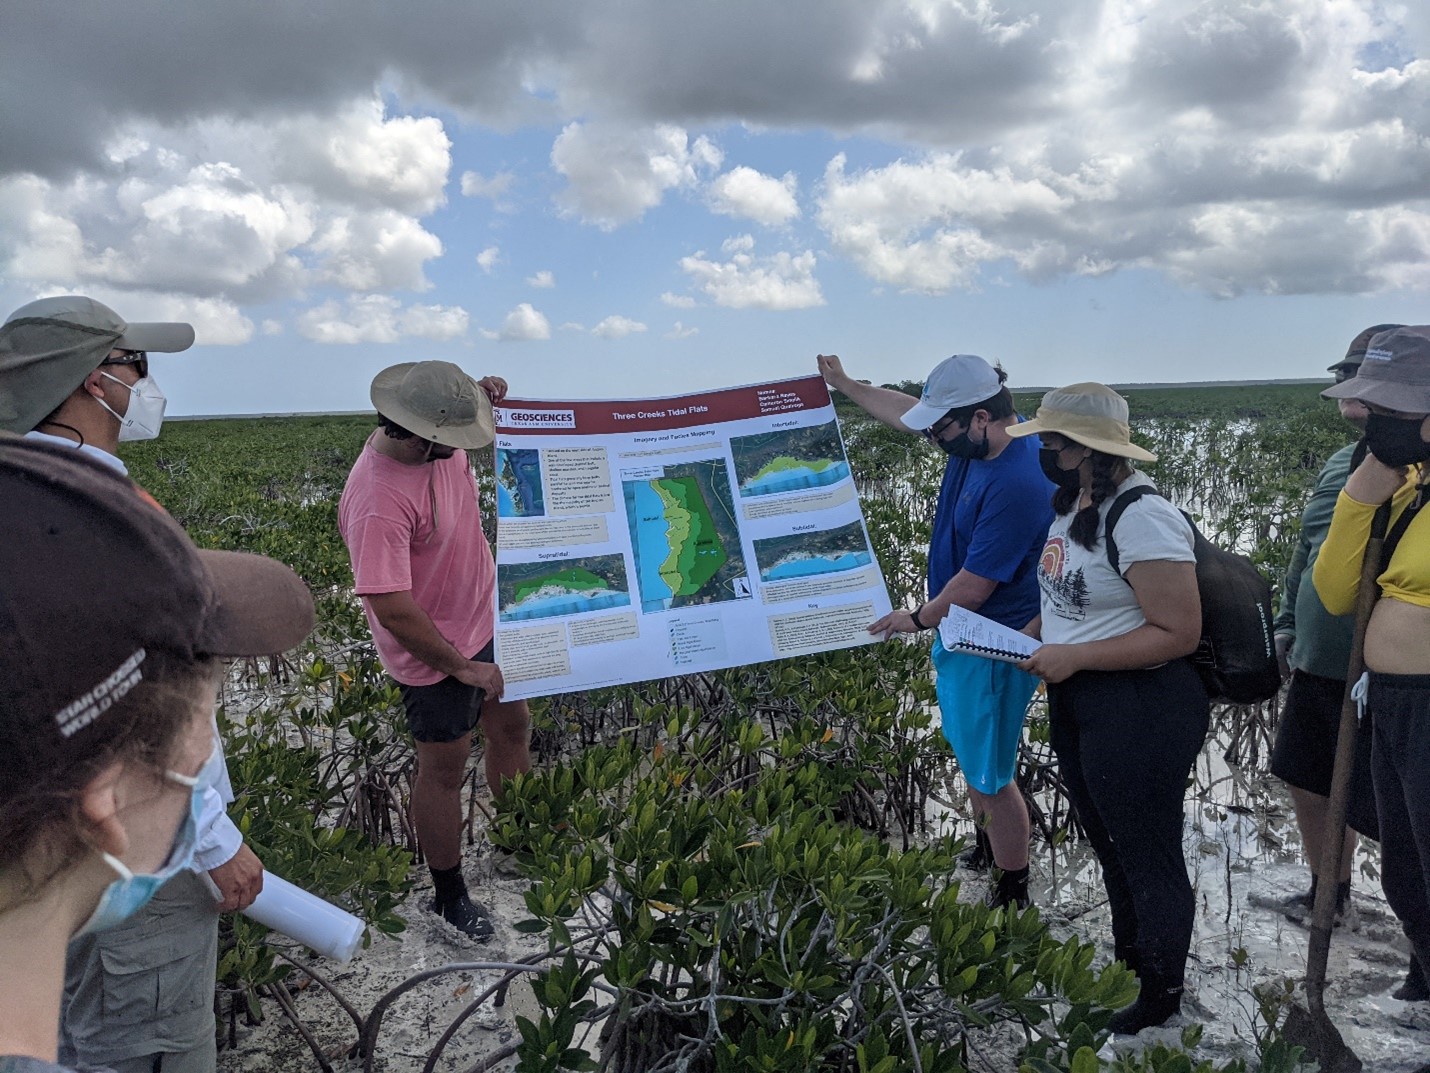 Geology undergraduate students (from left to right) Sam Queiroga, Cameron Smolik, and Barbara Reyes present their poster on the Three Creeks Tidal Flats.